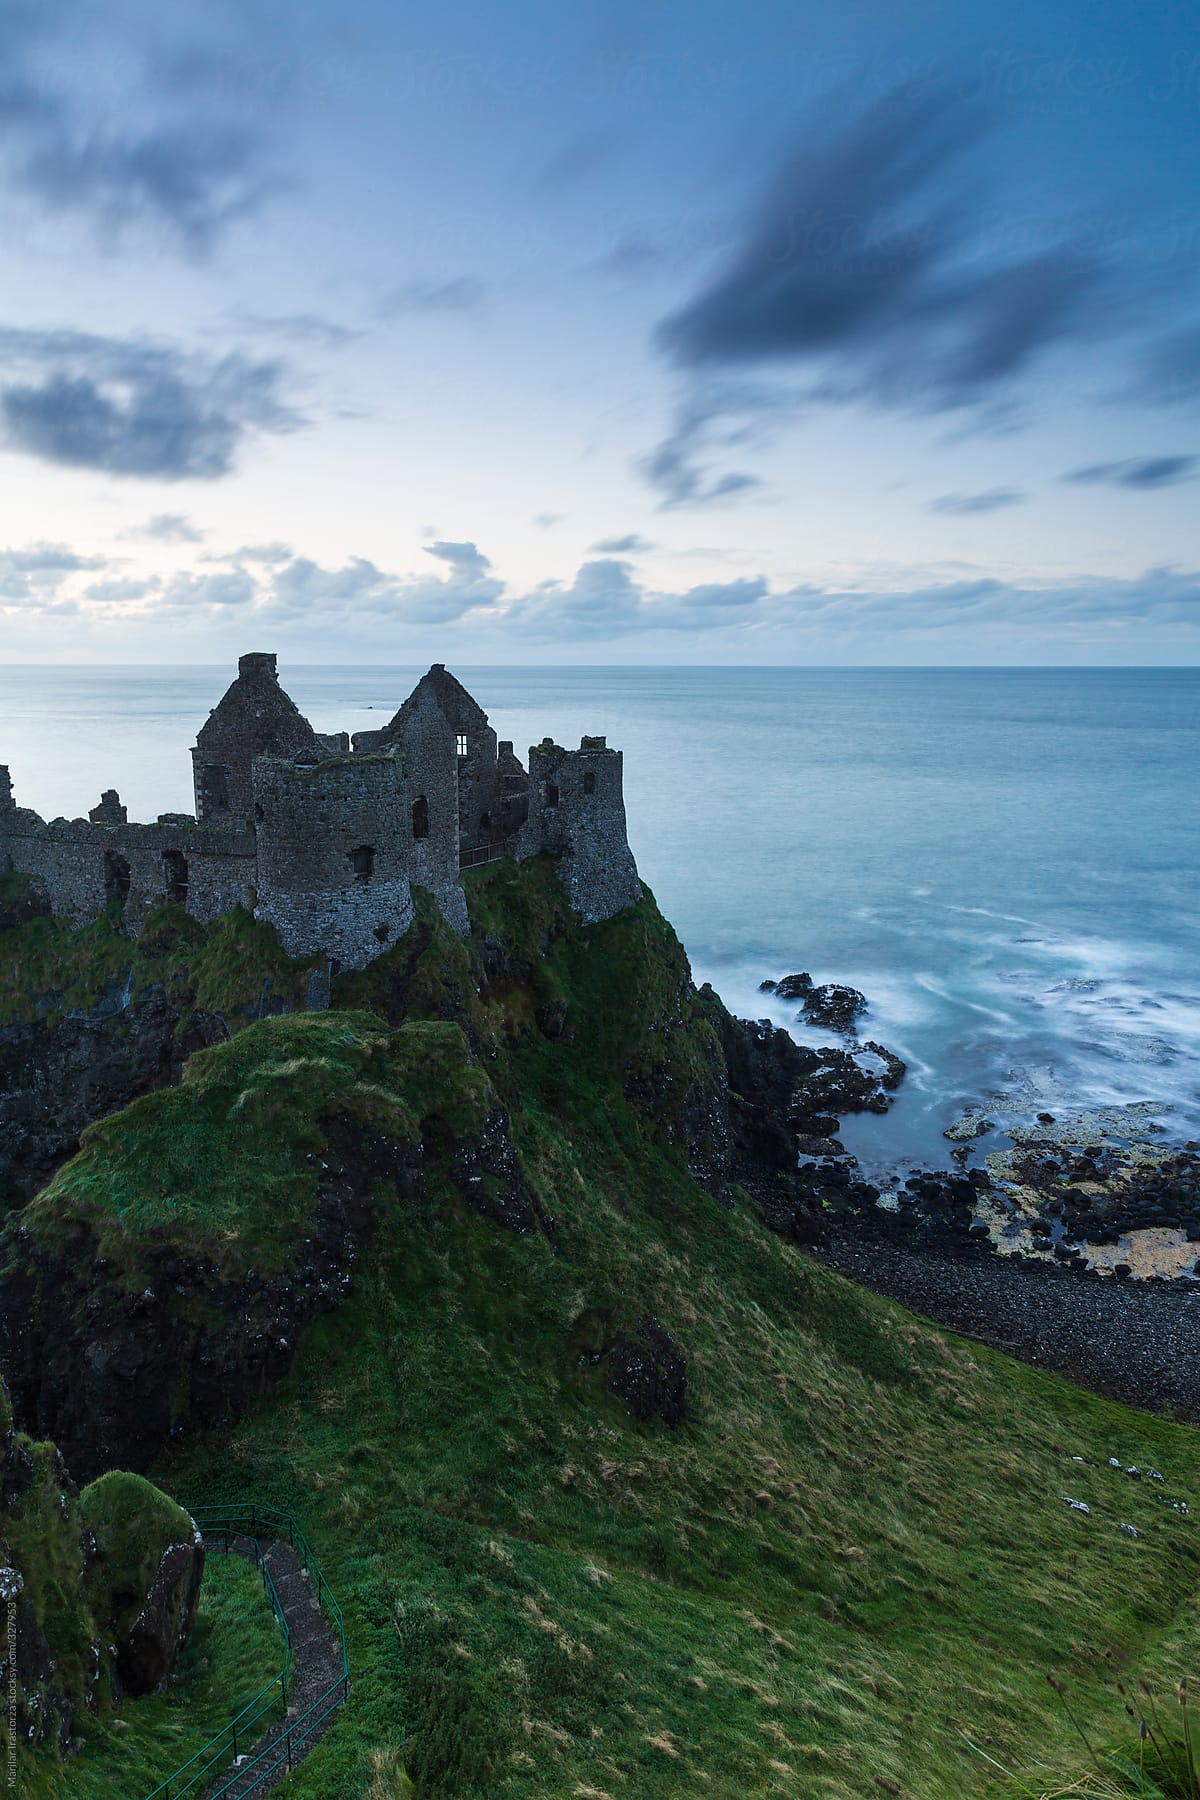 Ruins of a castle in the north Irish coast at sunset